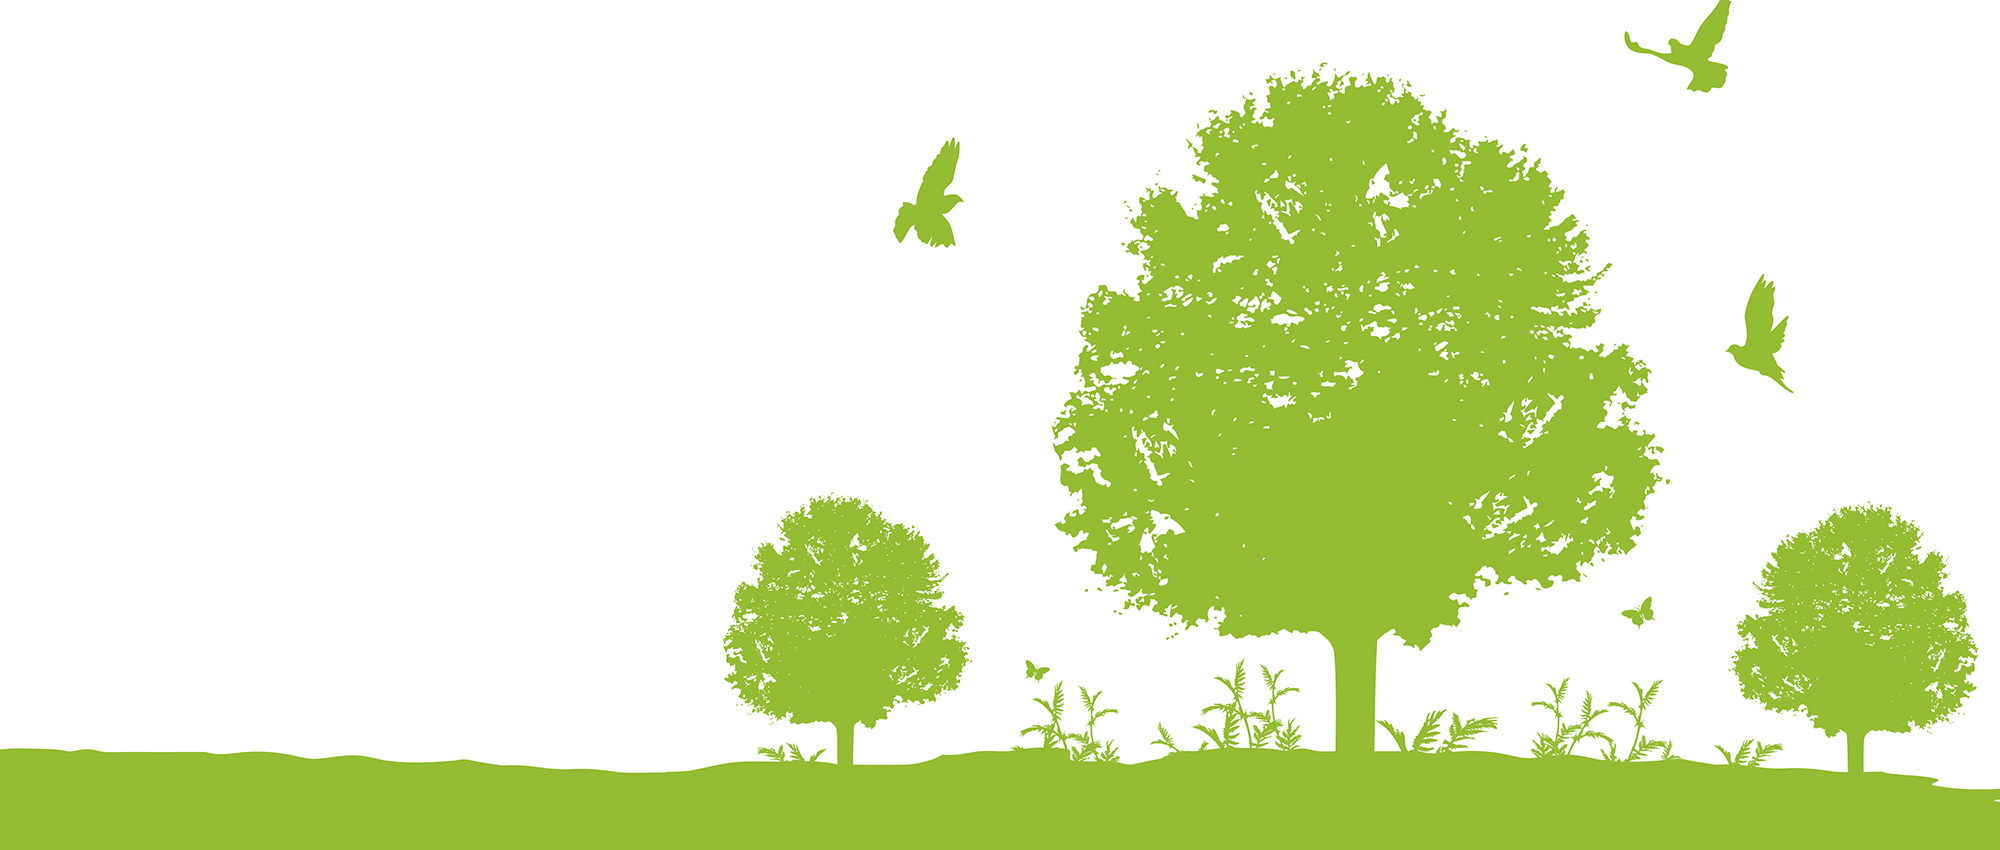 Green silhouette Illustration of trees and birds